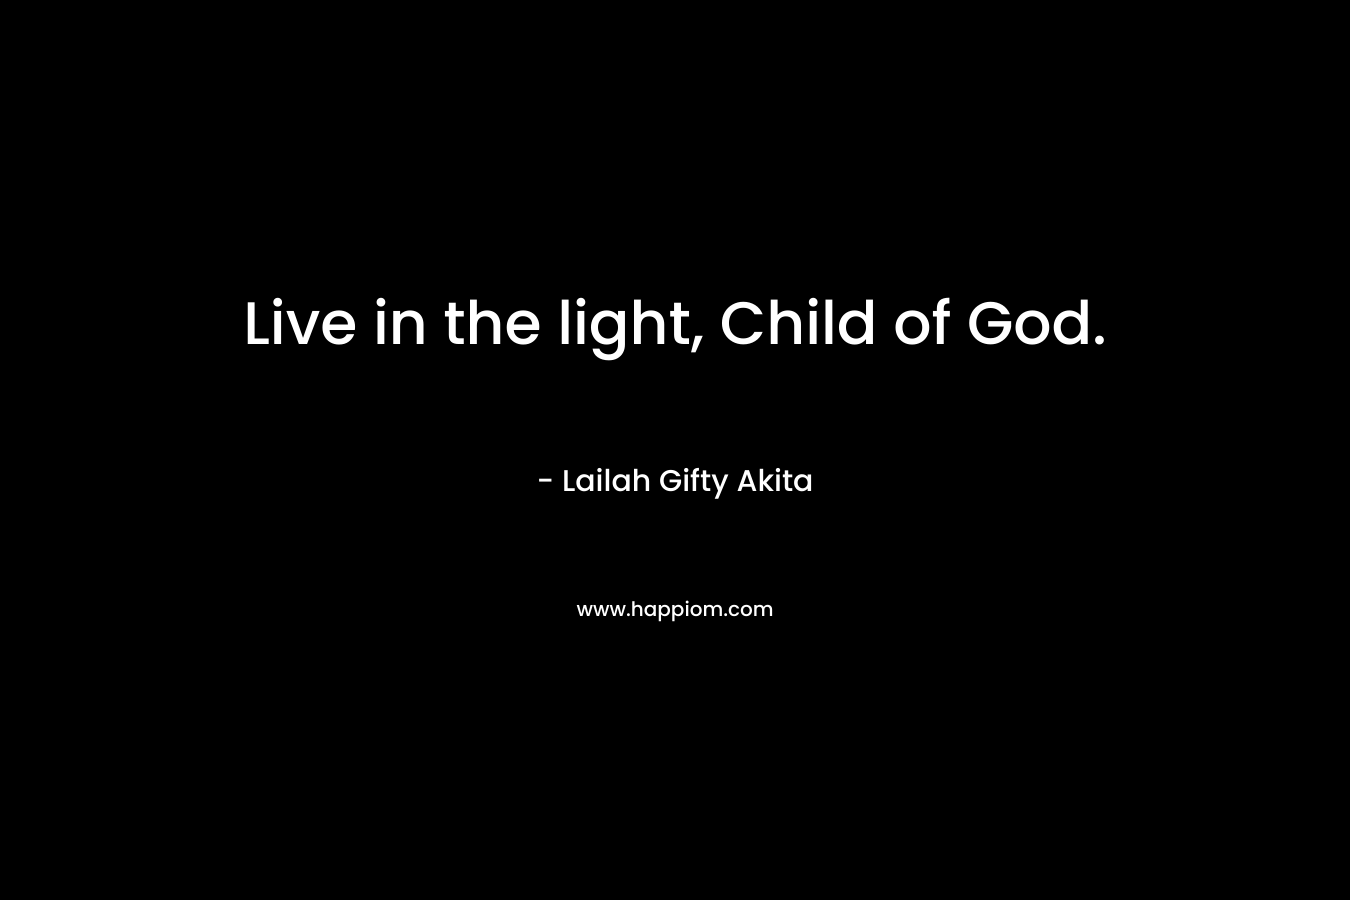 Live in the light, Child of God.